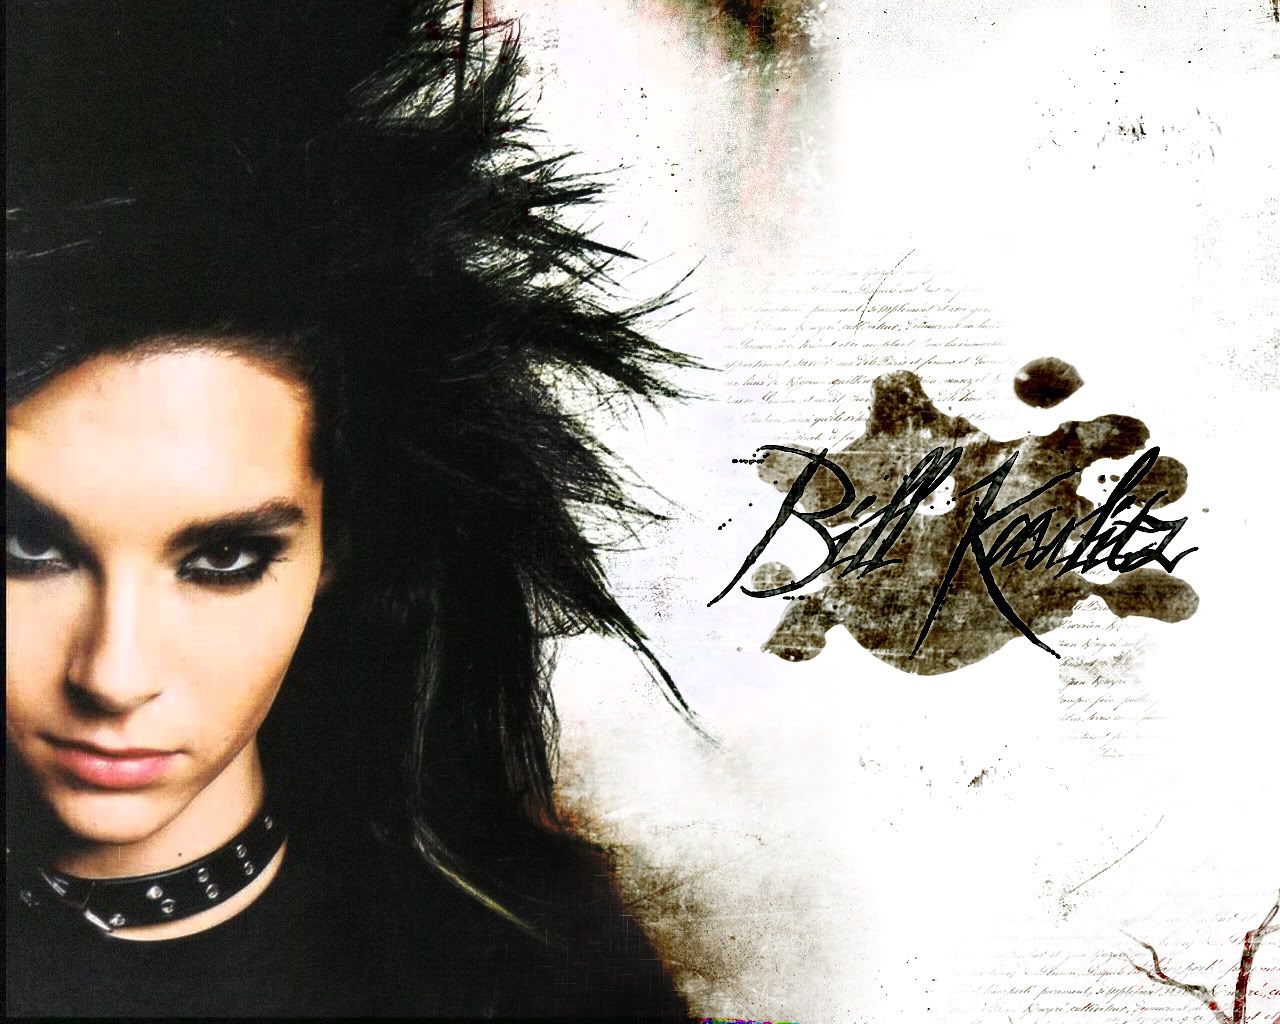 Bill Kaulitz Wallpaper Pictures, Images and Photos